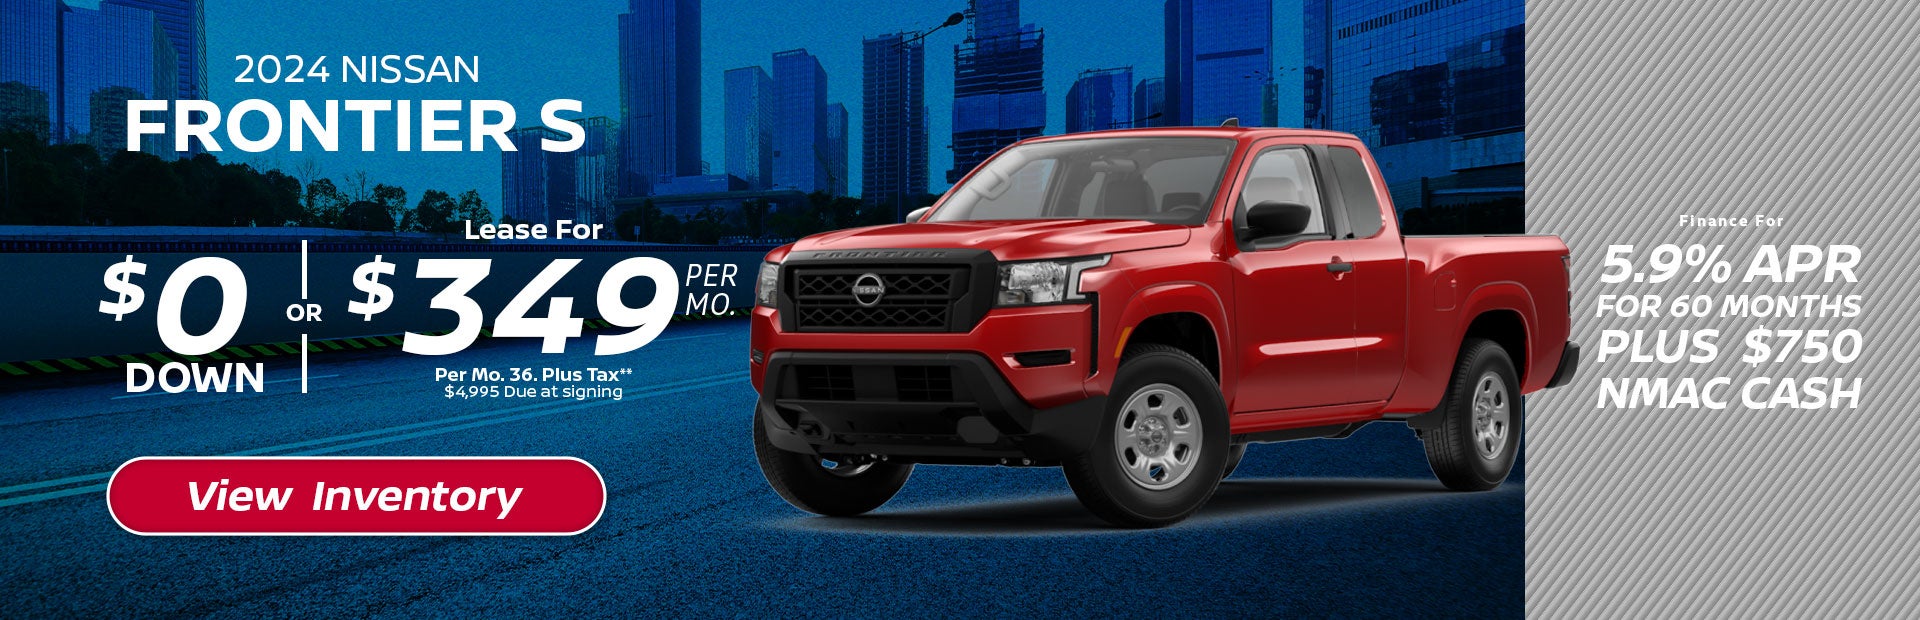 nissan frontier lease special